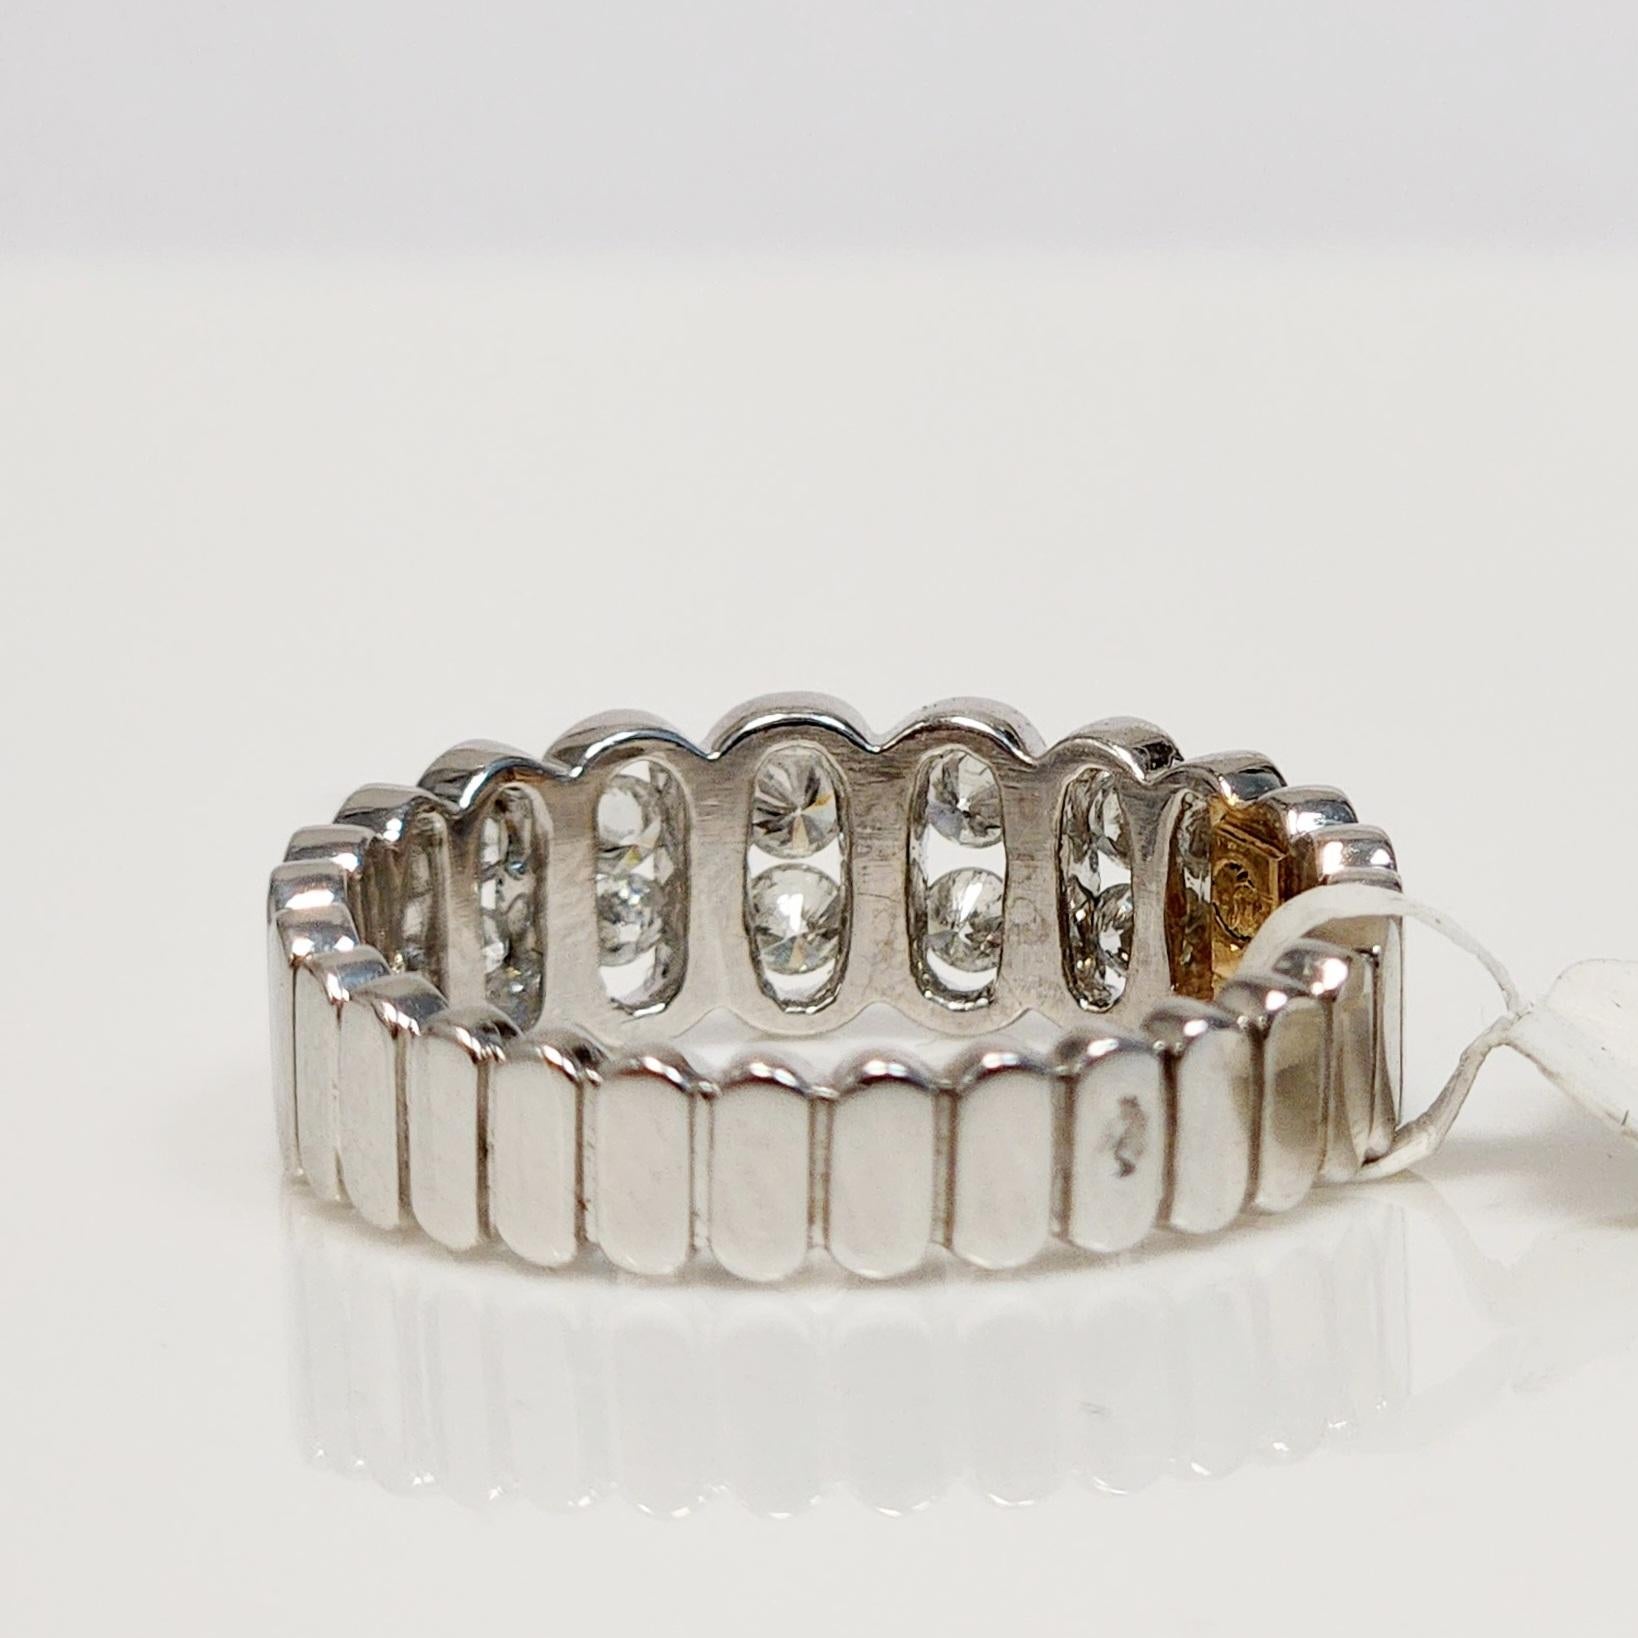 This stunning Oval Shaped Eternity Ring is a true beauty. It features seven oval bezels, each holding pairs of two round white diamonds, totaling 0.39 carats of weight. The diamonds are set in a sleek and elegant 18K white gold band, creating a